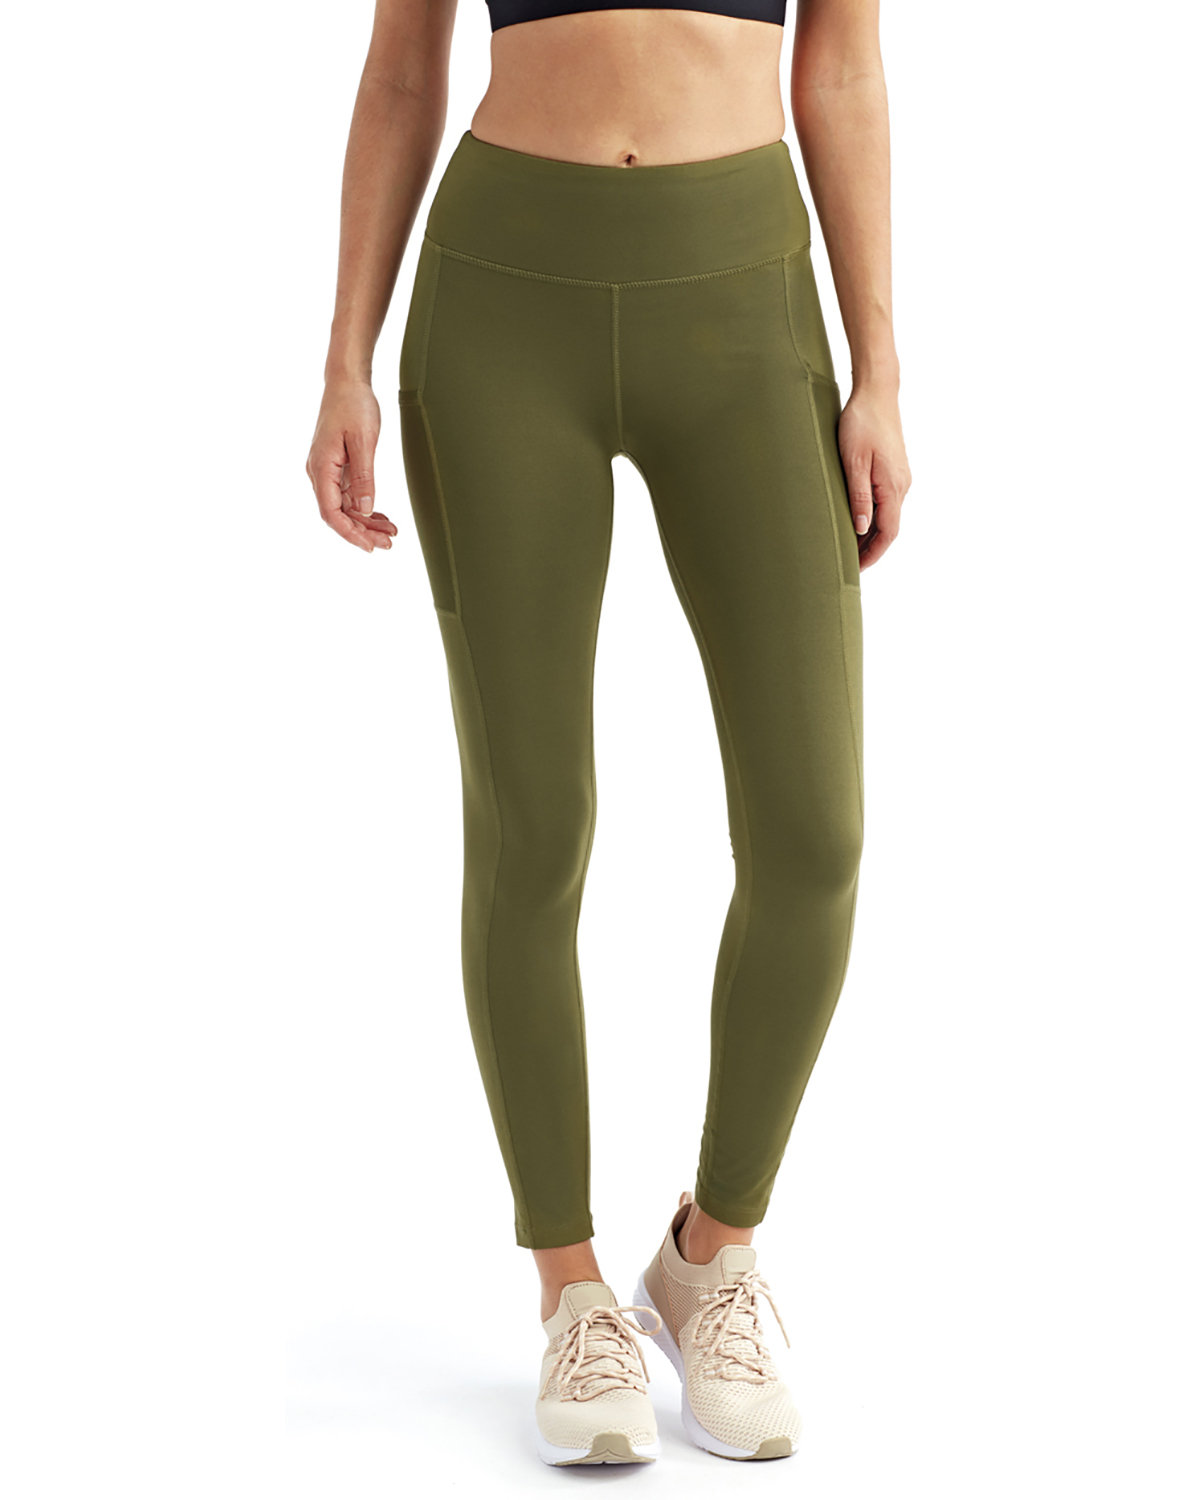 https://images.shirtspace.com/fullsize/J7sCwZXjVACECcxweehJjA%3D%3D/357637/17773-tri-dri-by-reprime-td304-ladies-performance-compression-leggings-front-olive.jpg